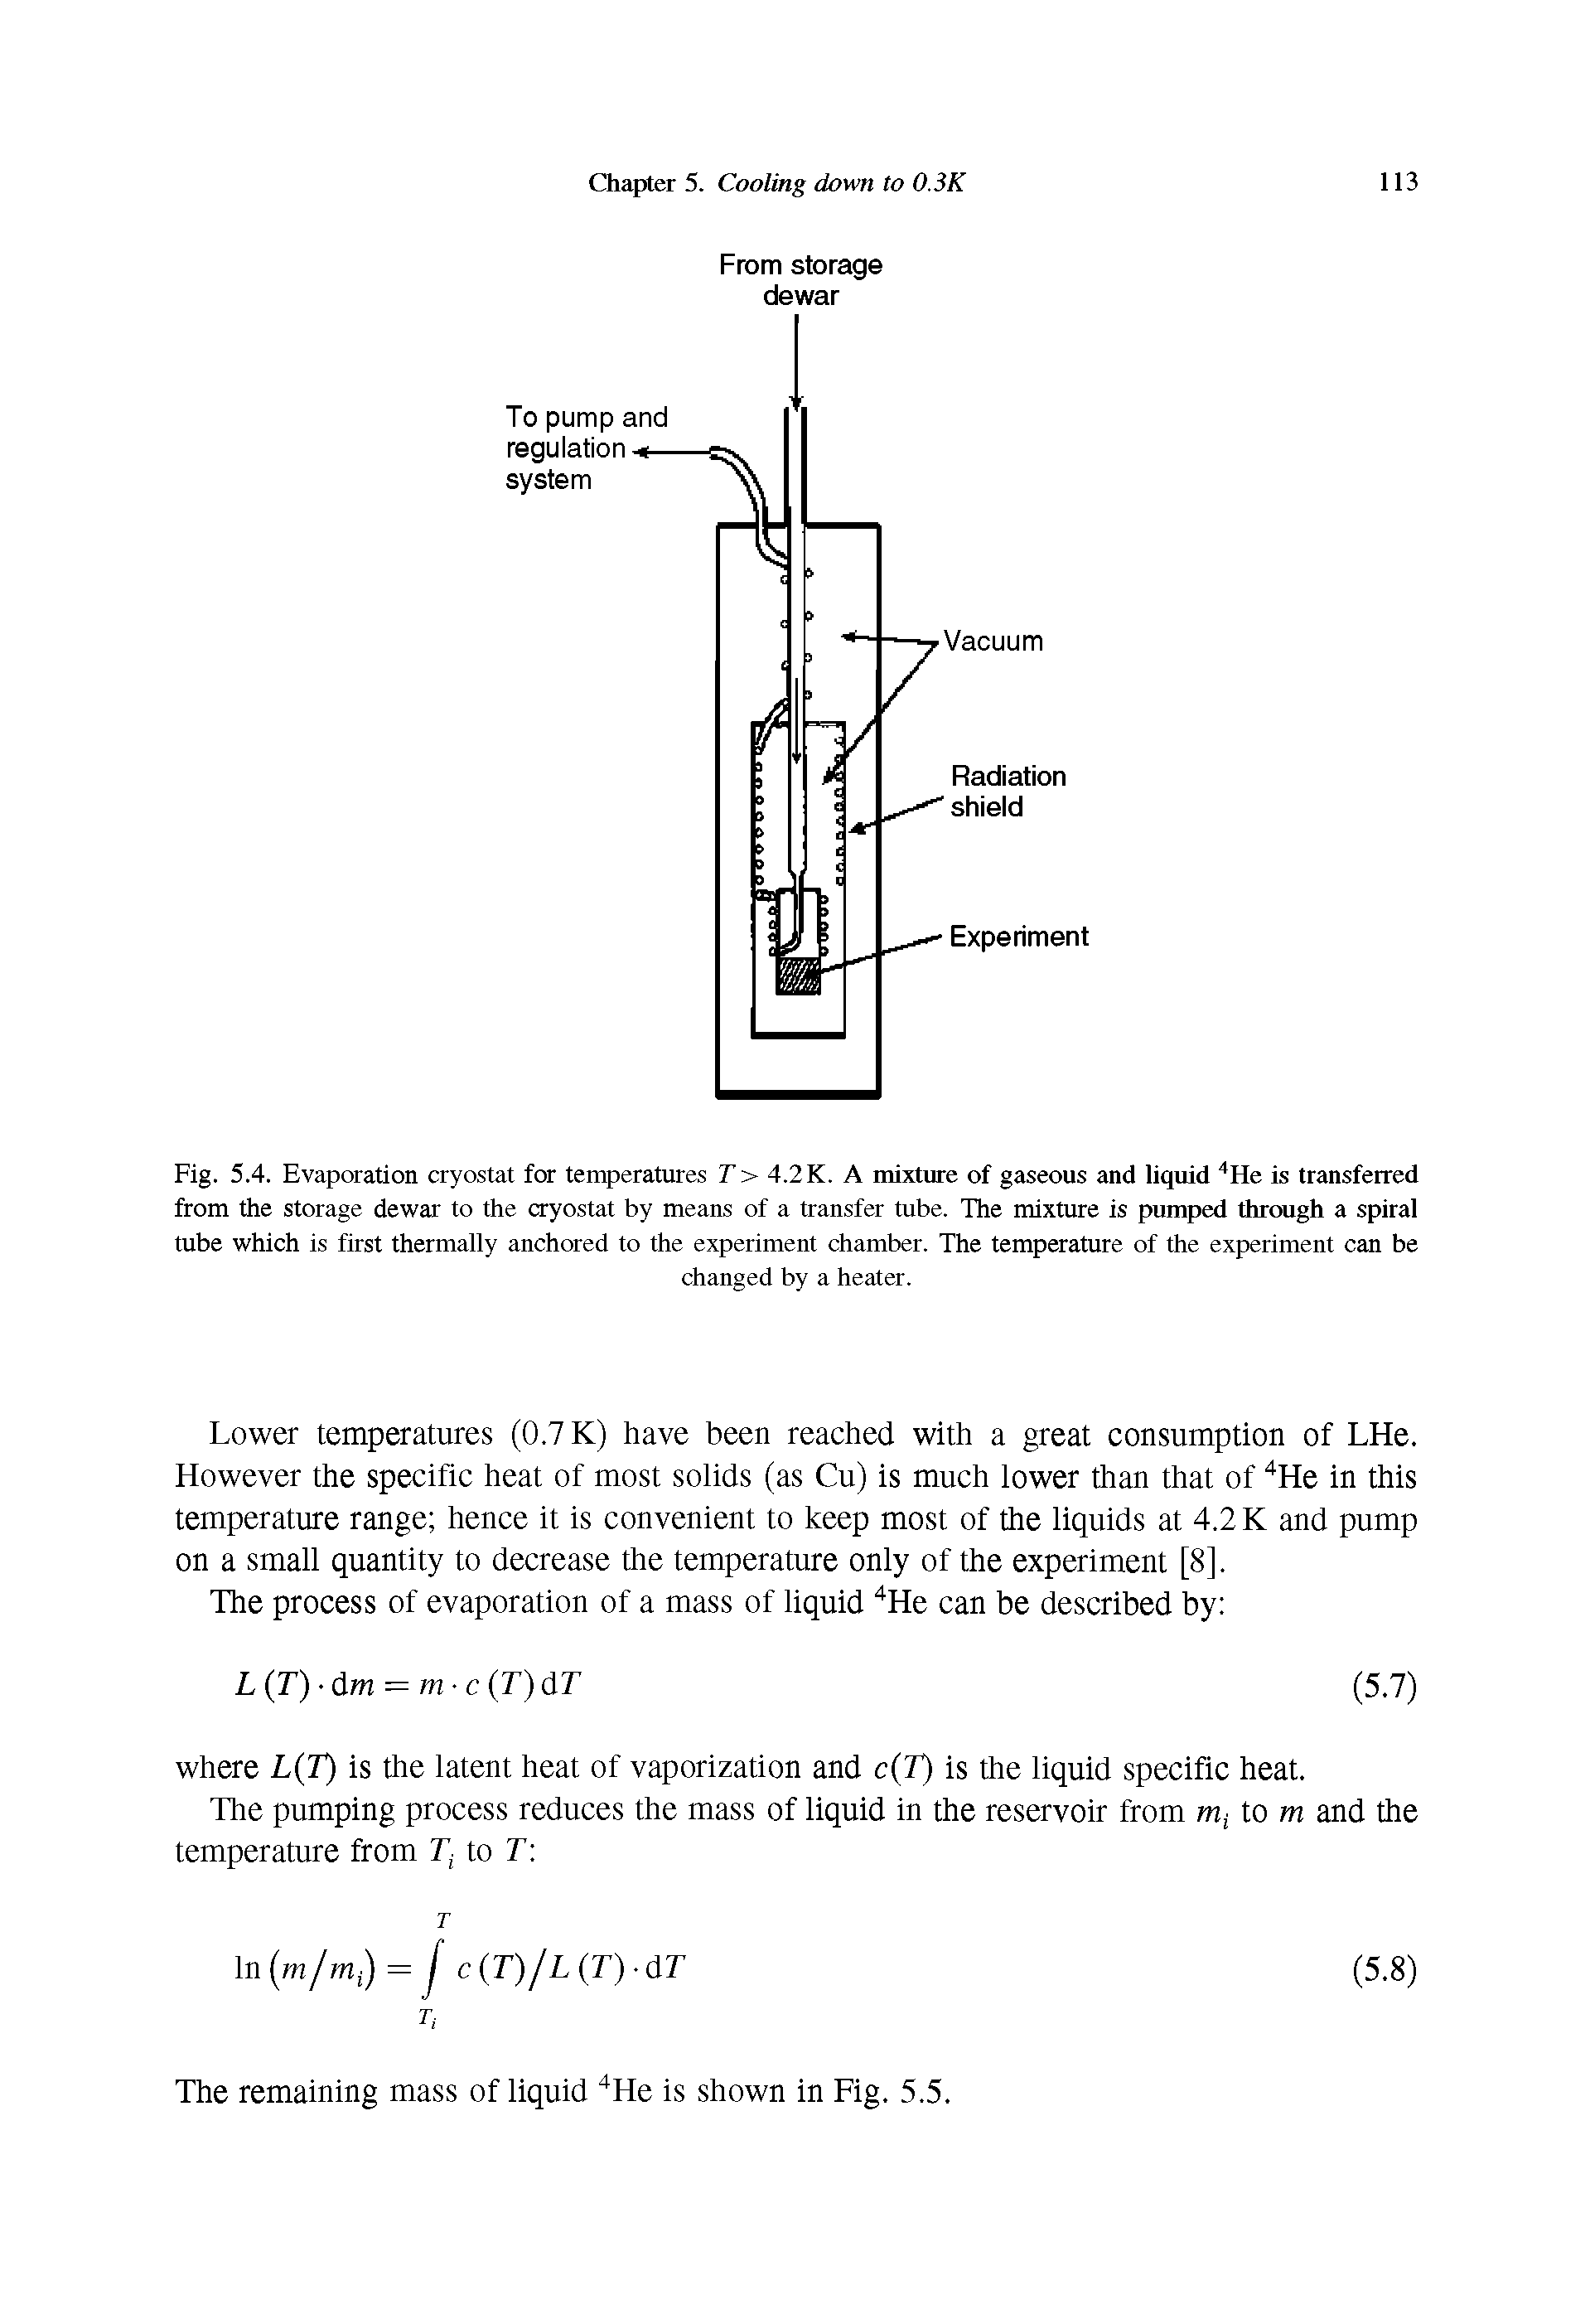 Fig. 5.4. Evaporation cryostat for temperatures T > 4.2 K. A mixture of gaseous and liquid 4He is transferred from the storage dewar to the cryostat by means of a transfer tube. The mixture is pumped through a spiral tube which is first thermally anchored to the experiment chamber. The temperature of the experiment can be...